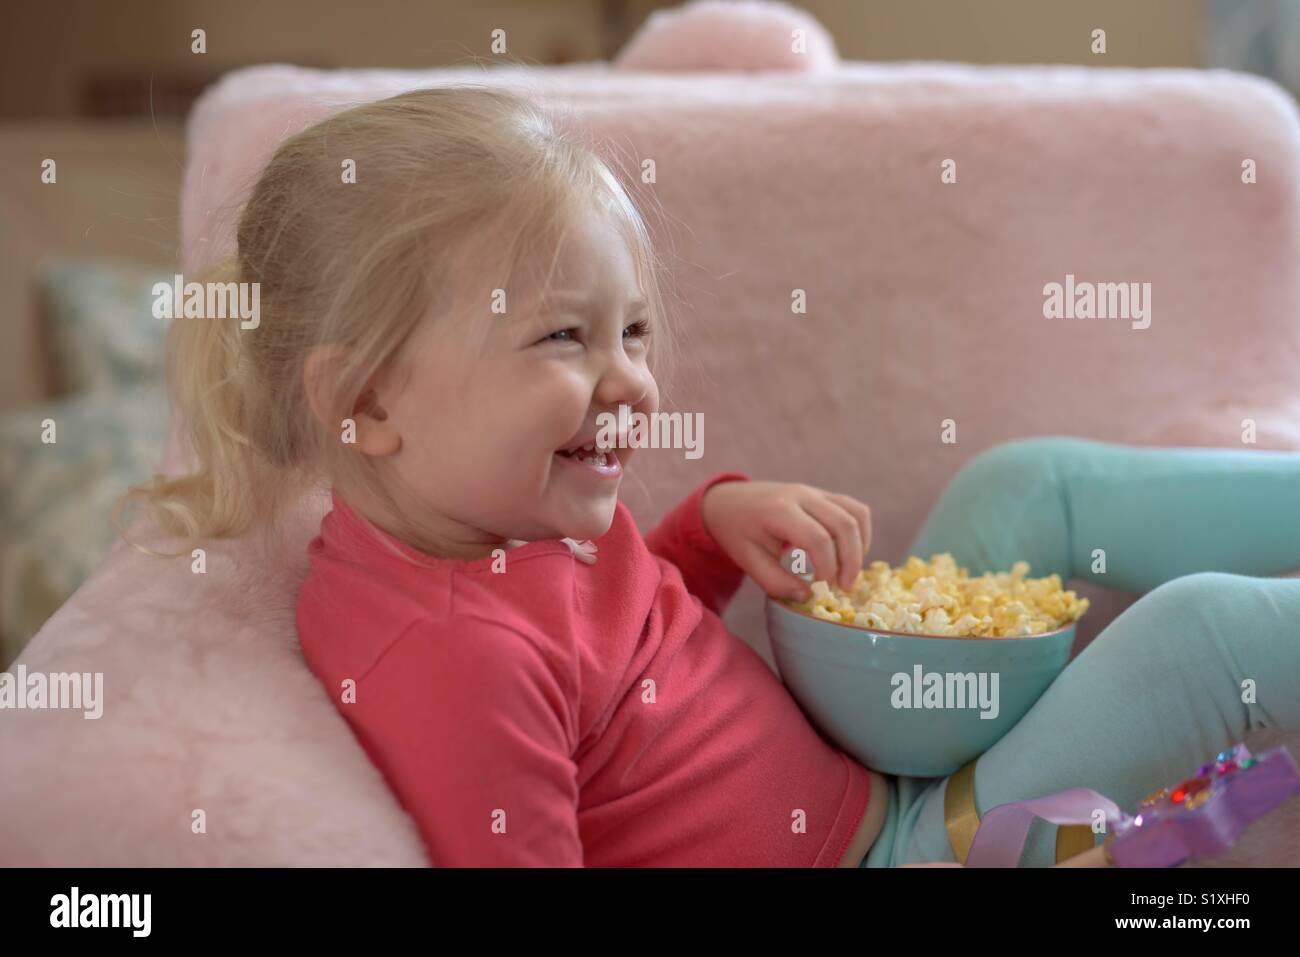 Smiling child eating popcorn while watching a movie on TV Stock Photo